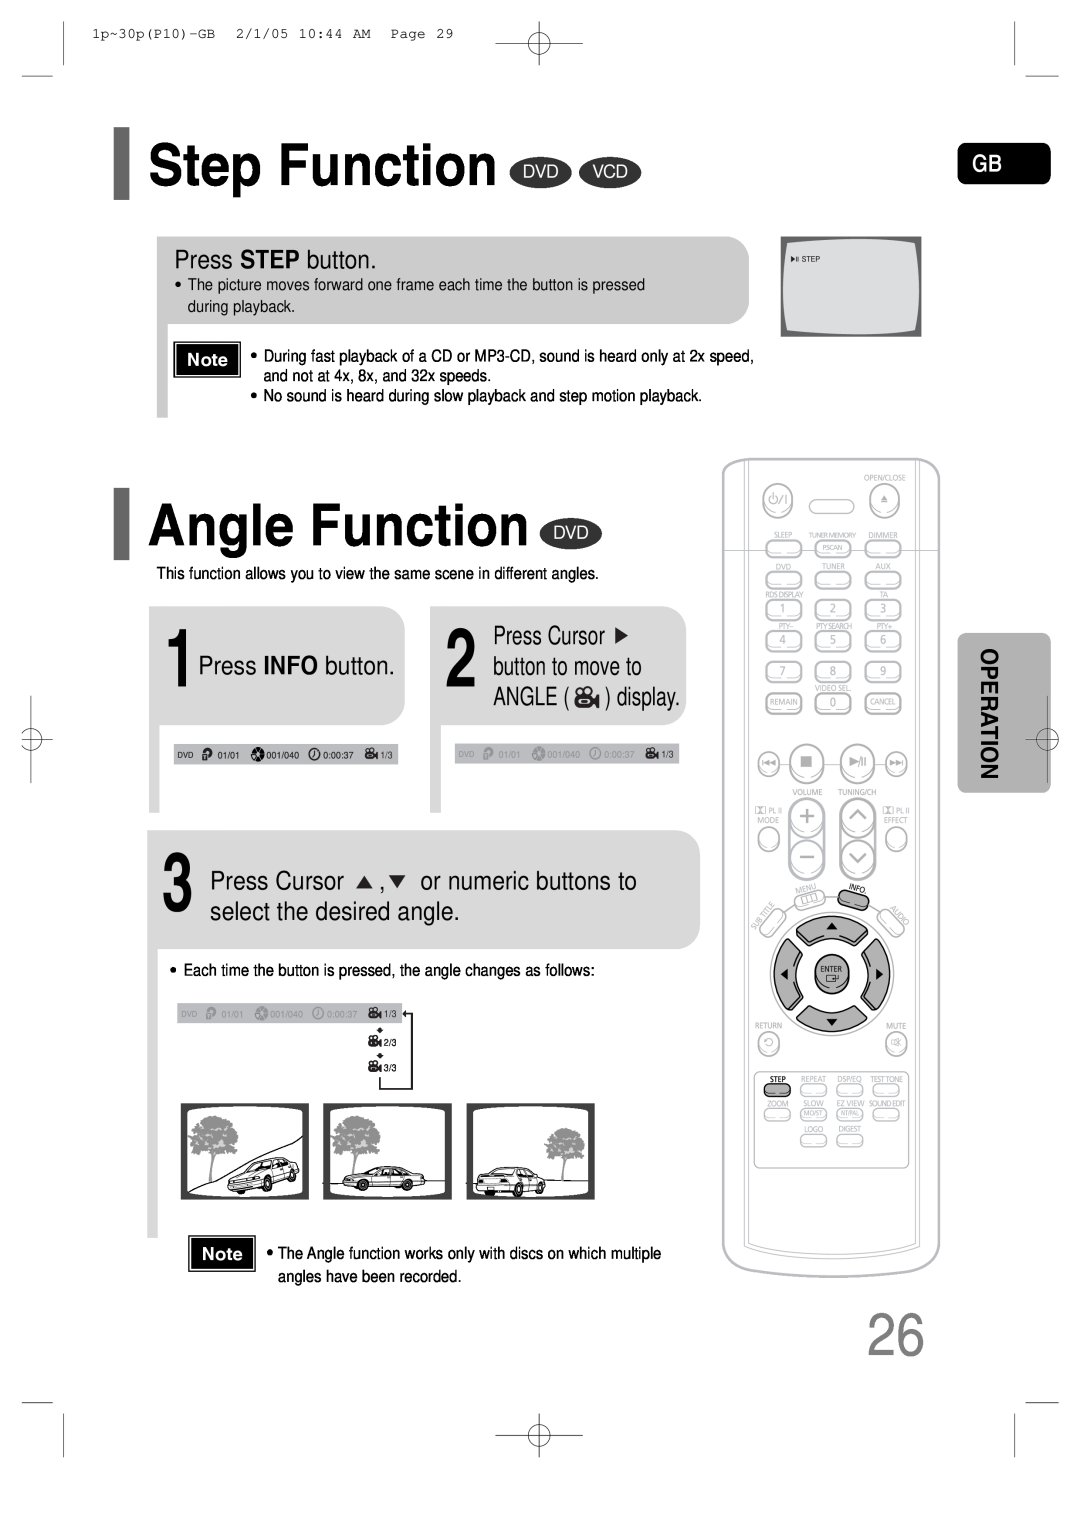 Samsung P10 Step Function DVD VCD, Angle Function DVD, Press STEP button, Press Cursor, button to move to, ANGLE display 